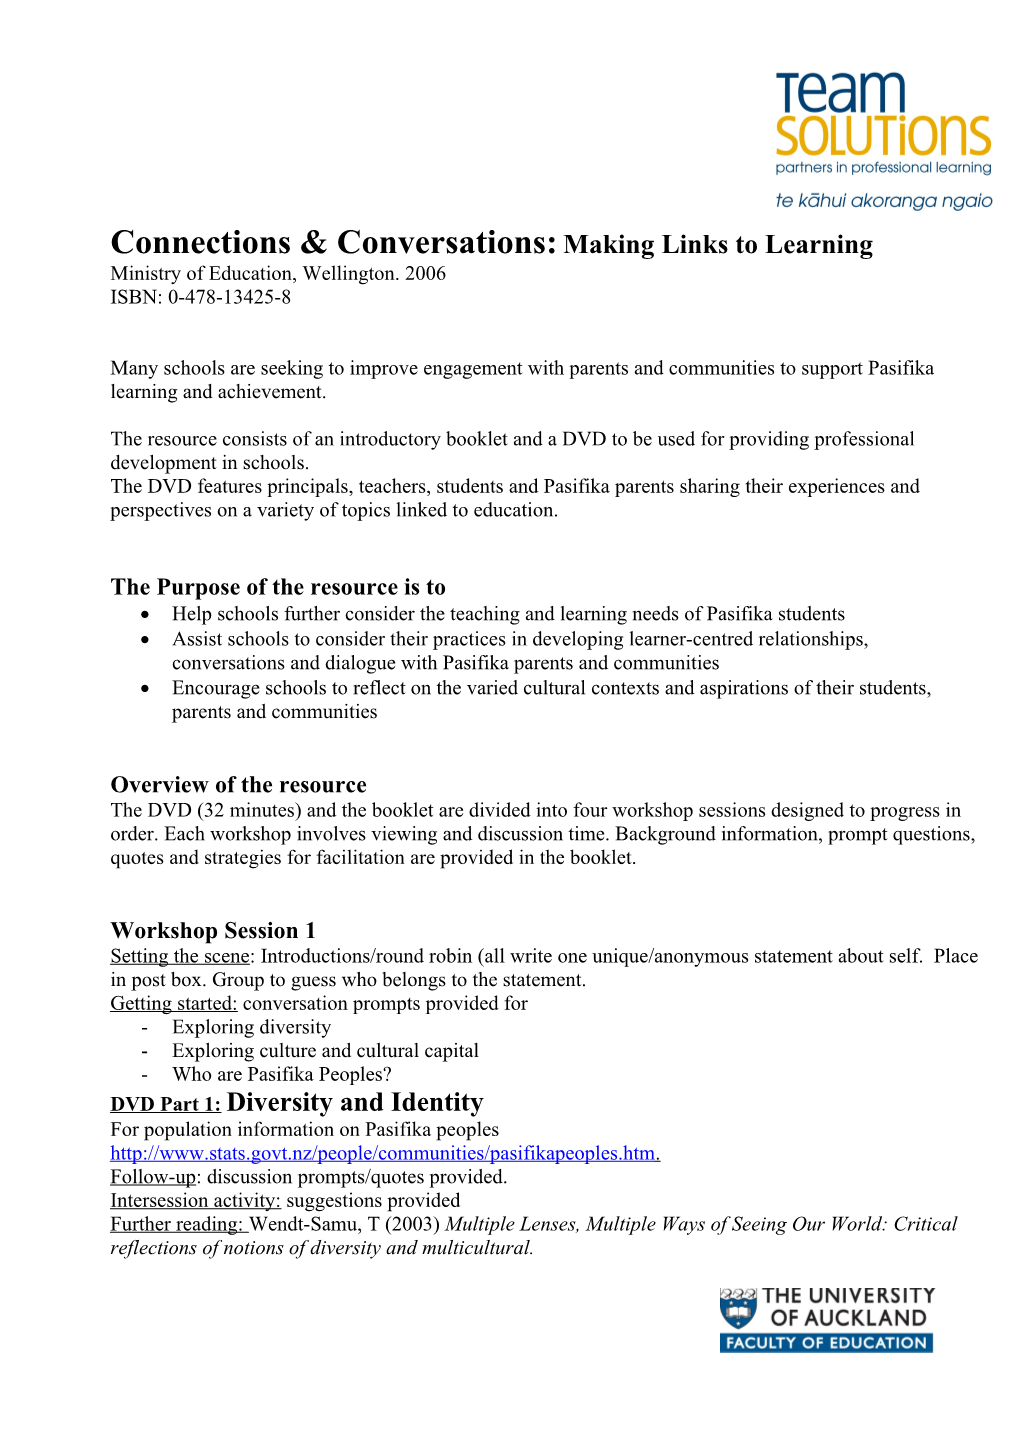 Connections & Conversations:Making Links to Learning